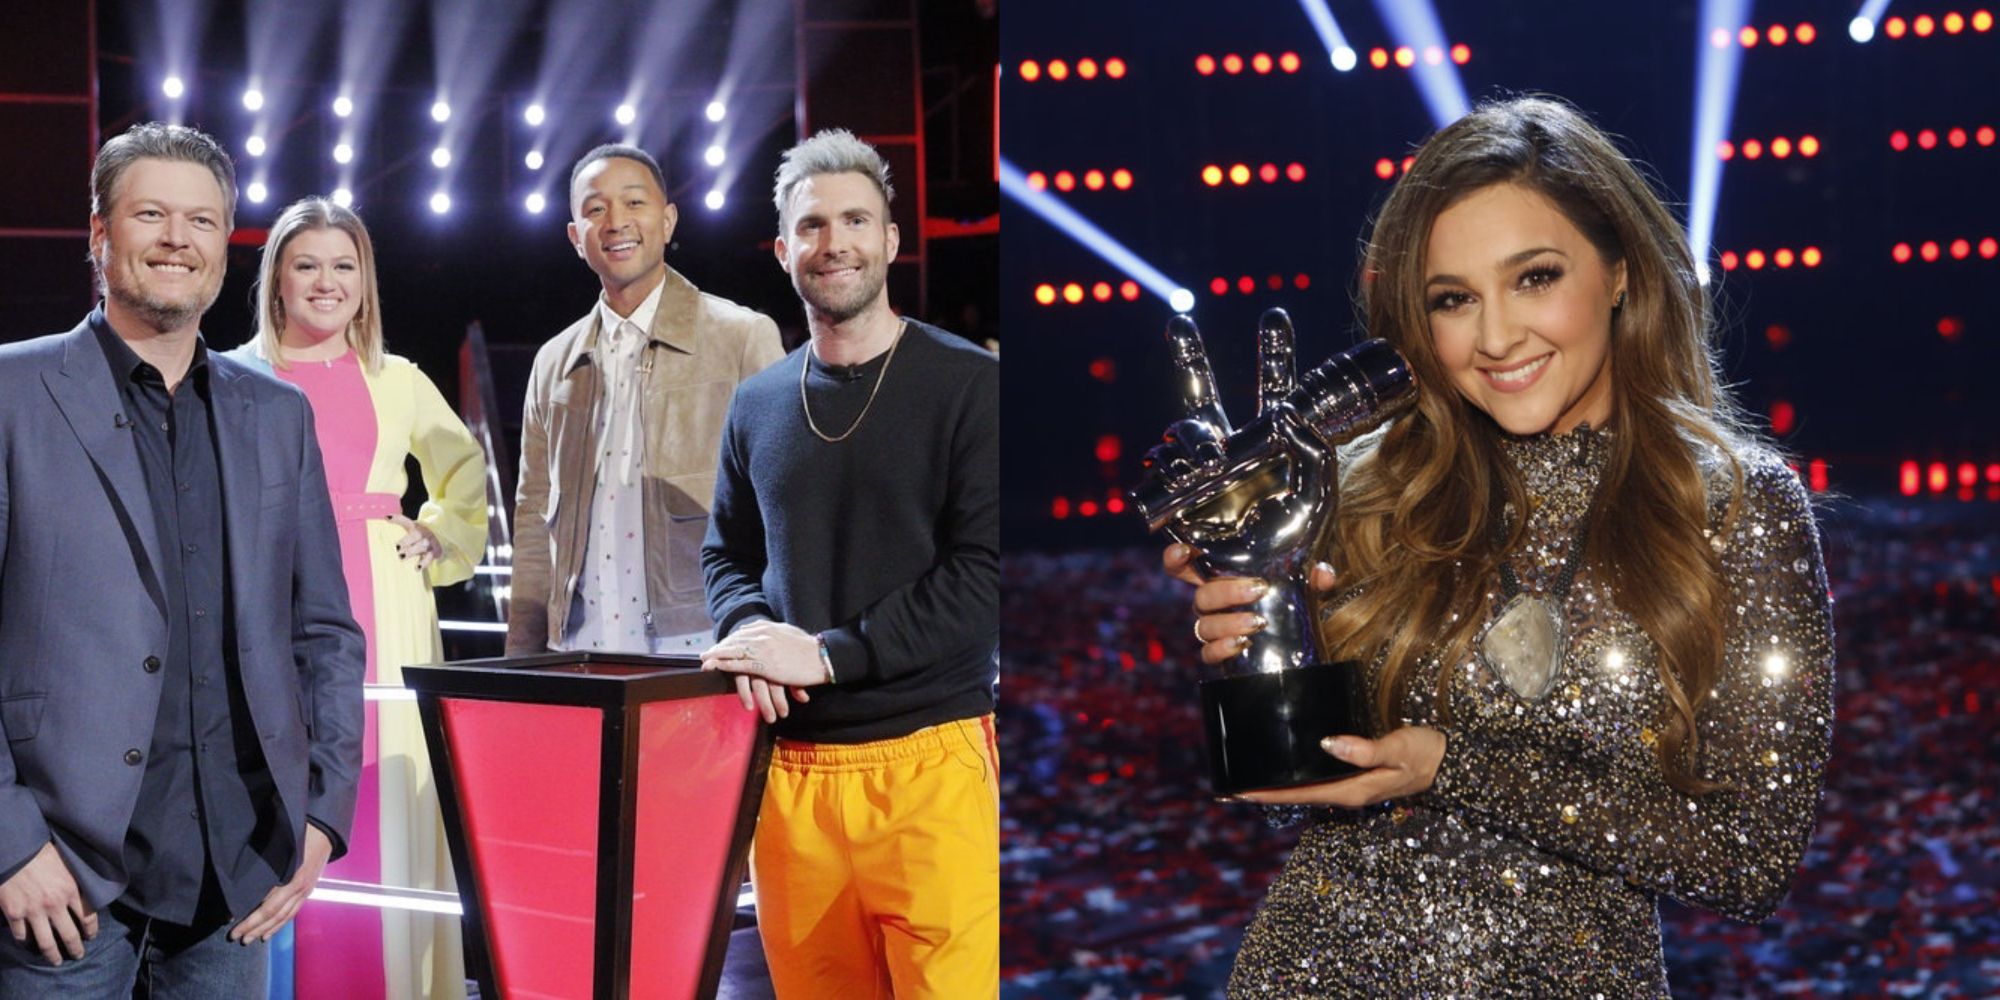 The 10 Best Seasons Of The Voice, According To Reddit